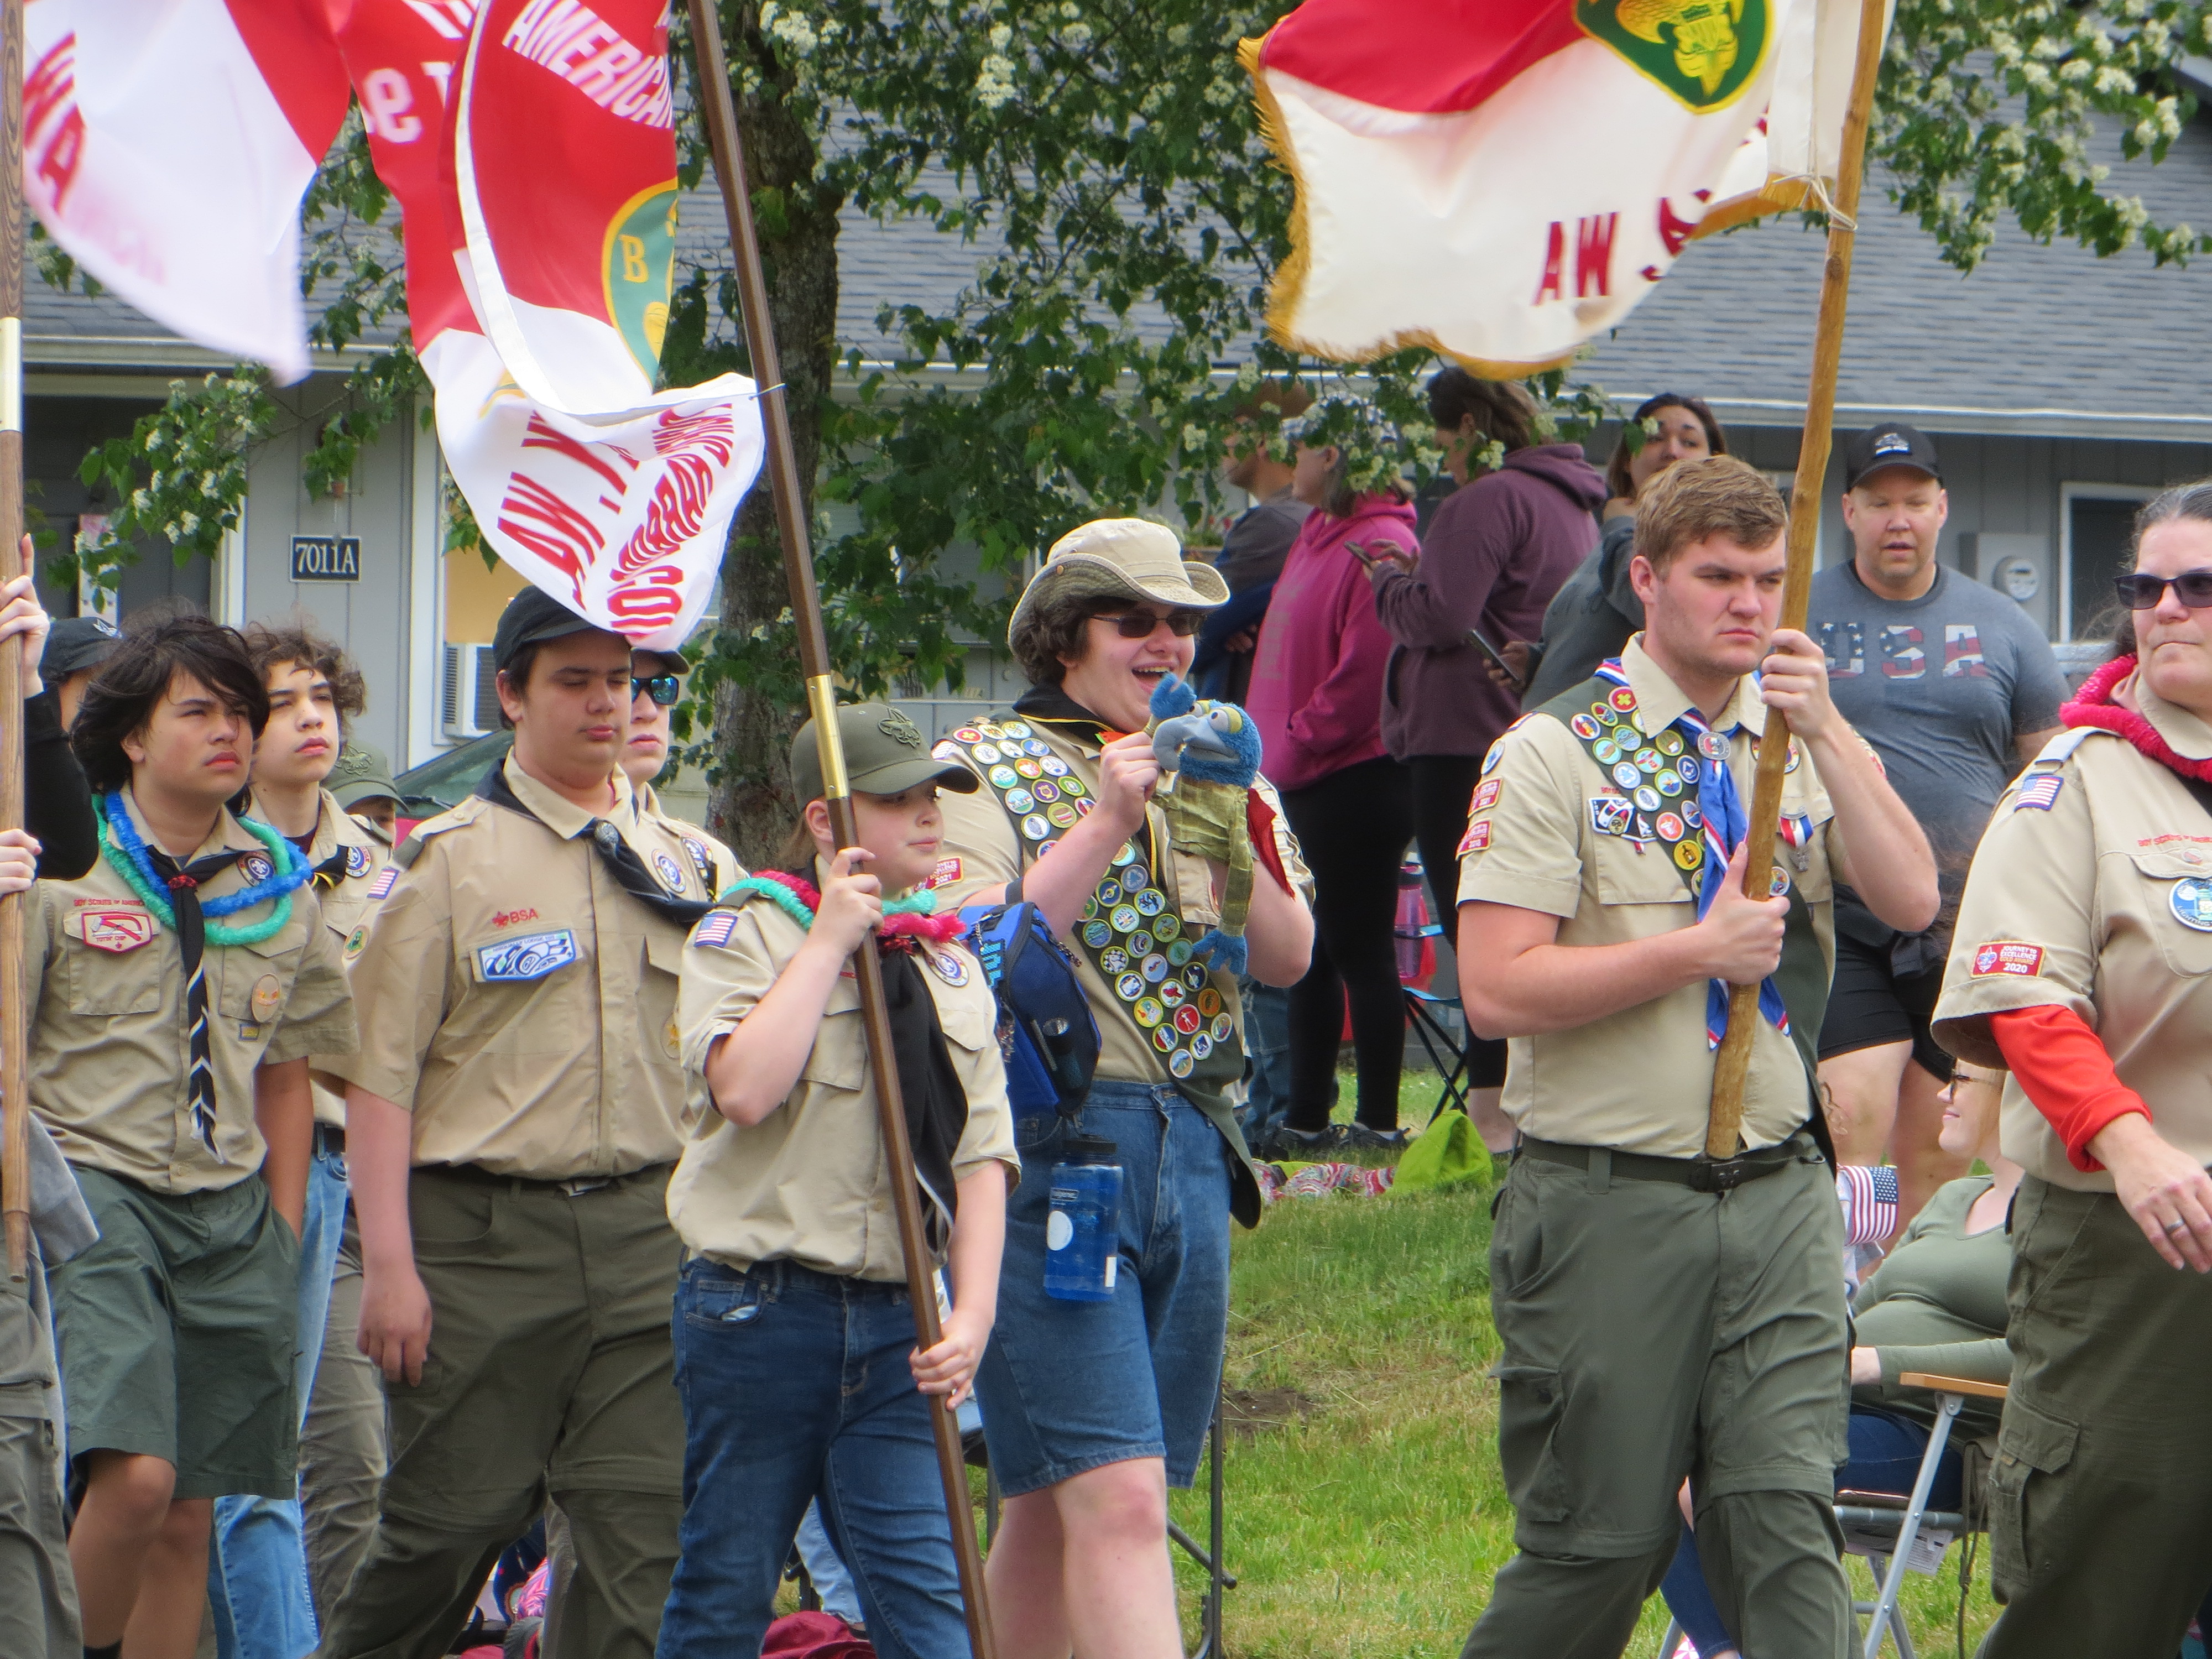 Scouts walking down a road in a parade.